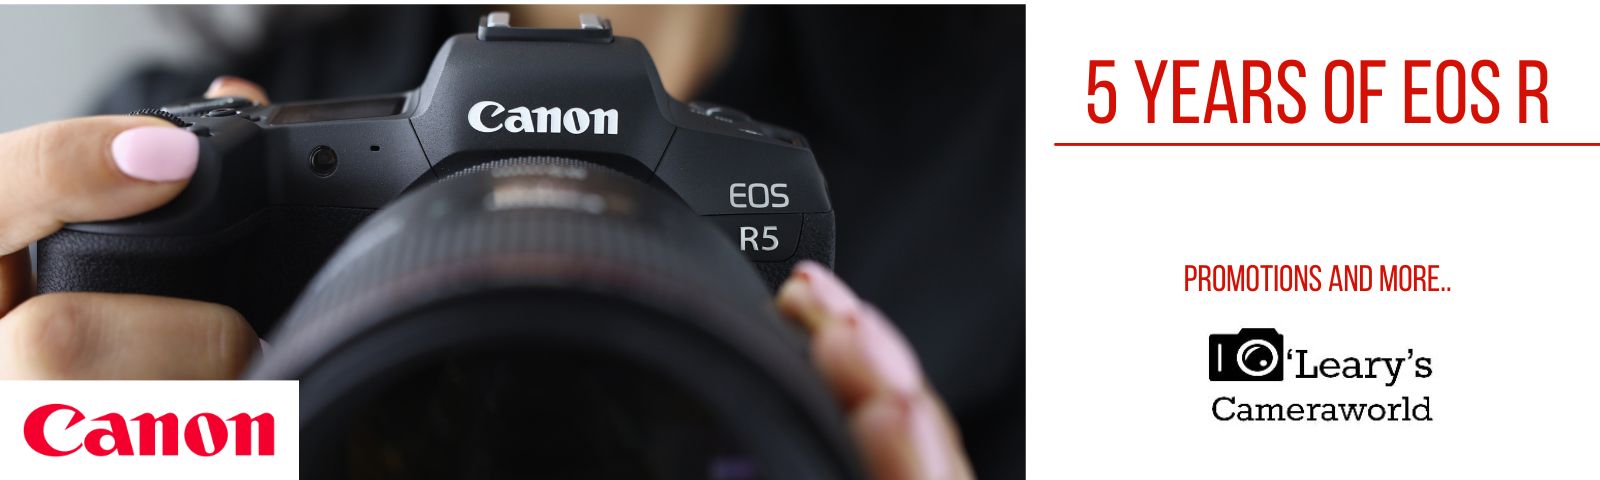 Canon EOS R Trade-in Promotion